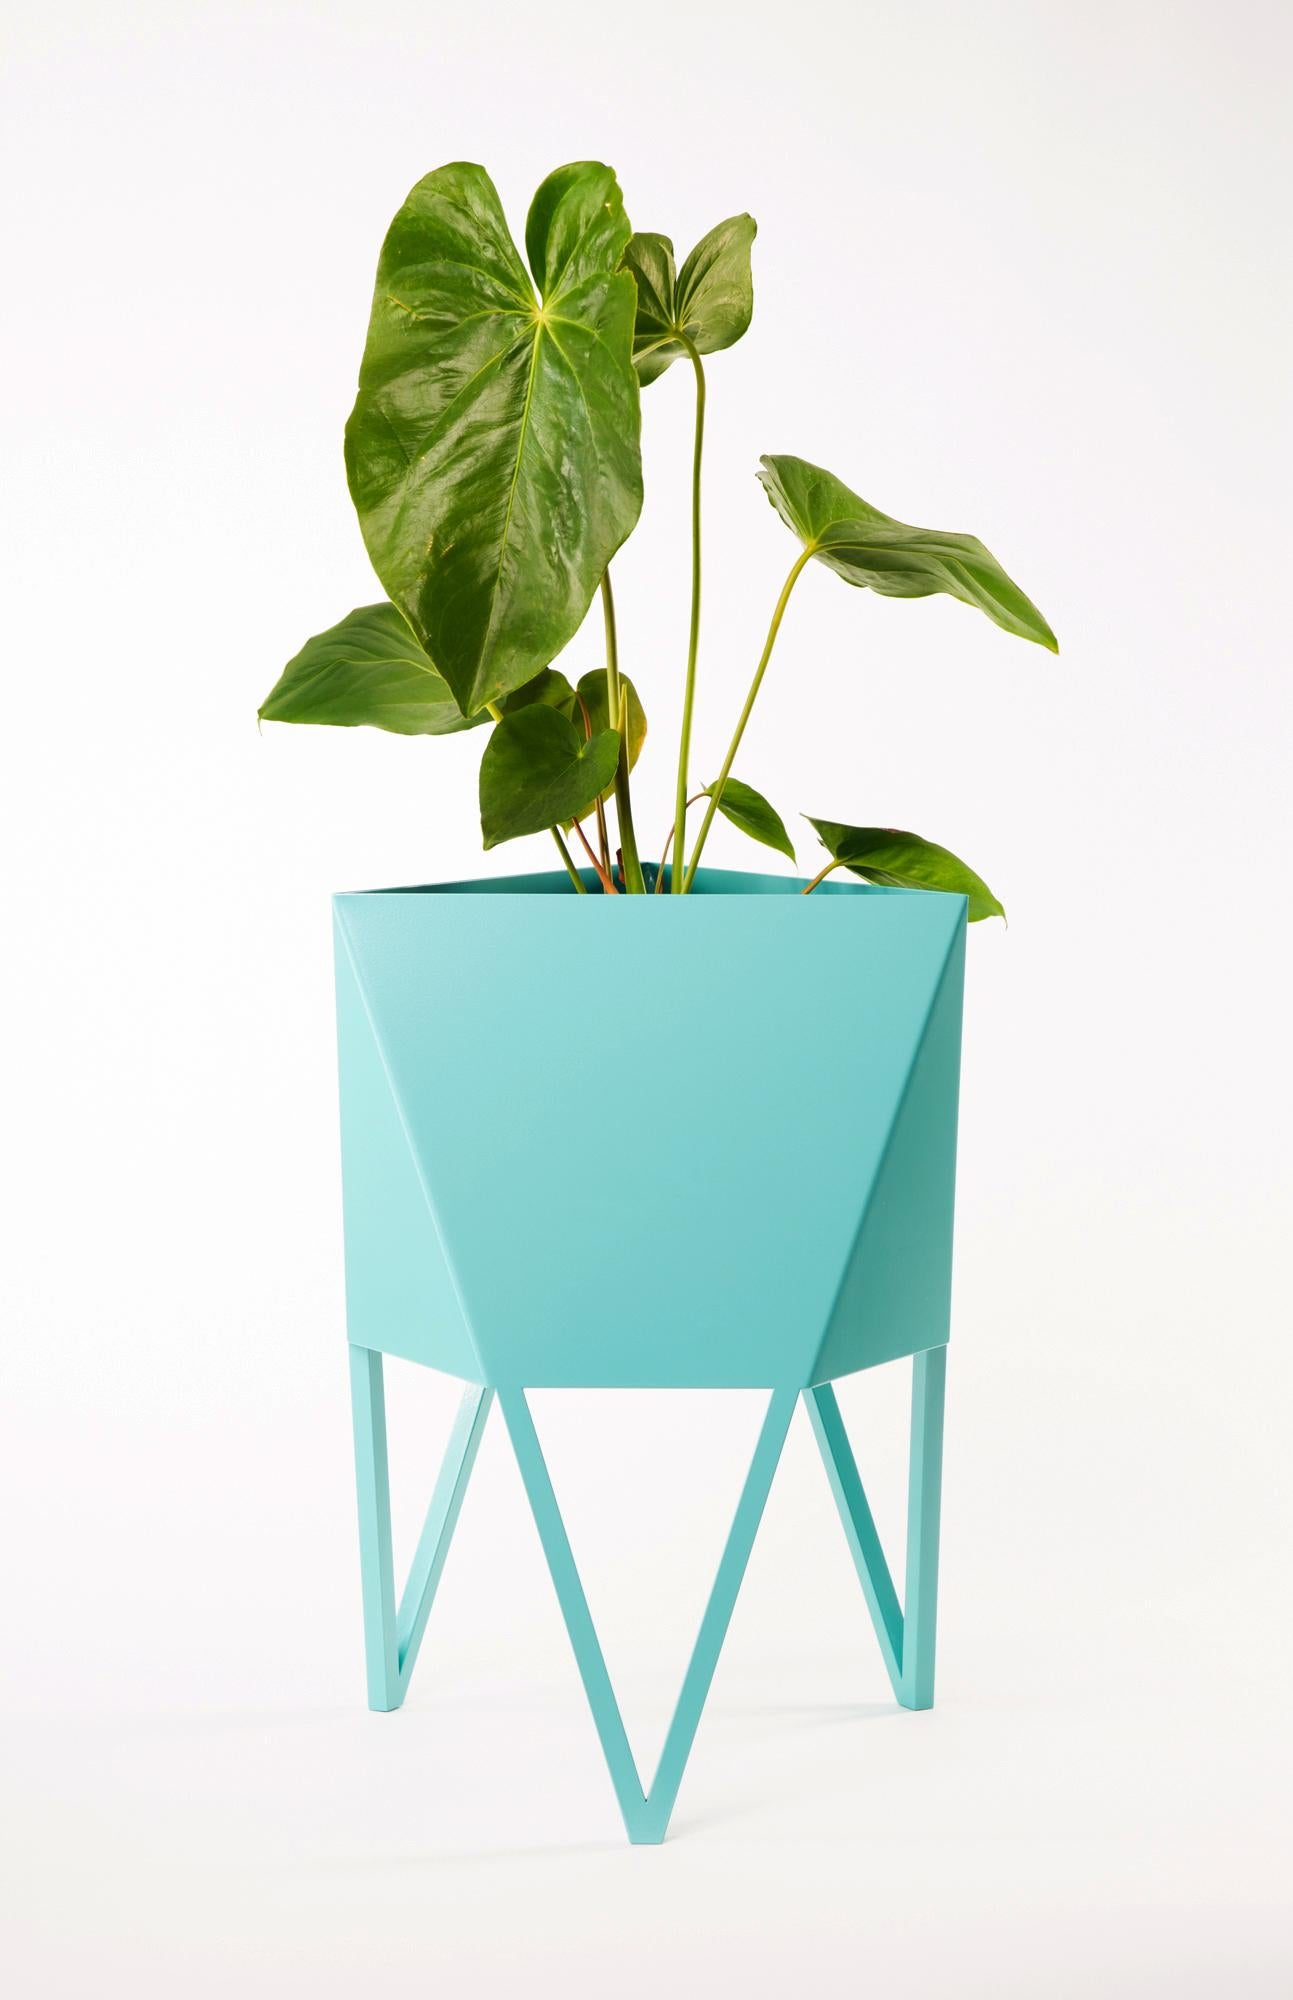 Steel Deca Planter in Mineral, Large, by Force/Collide, 2023